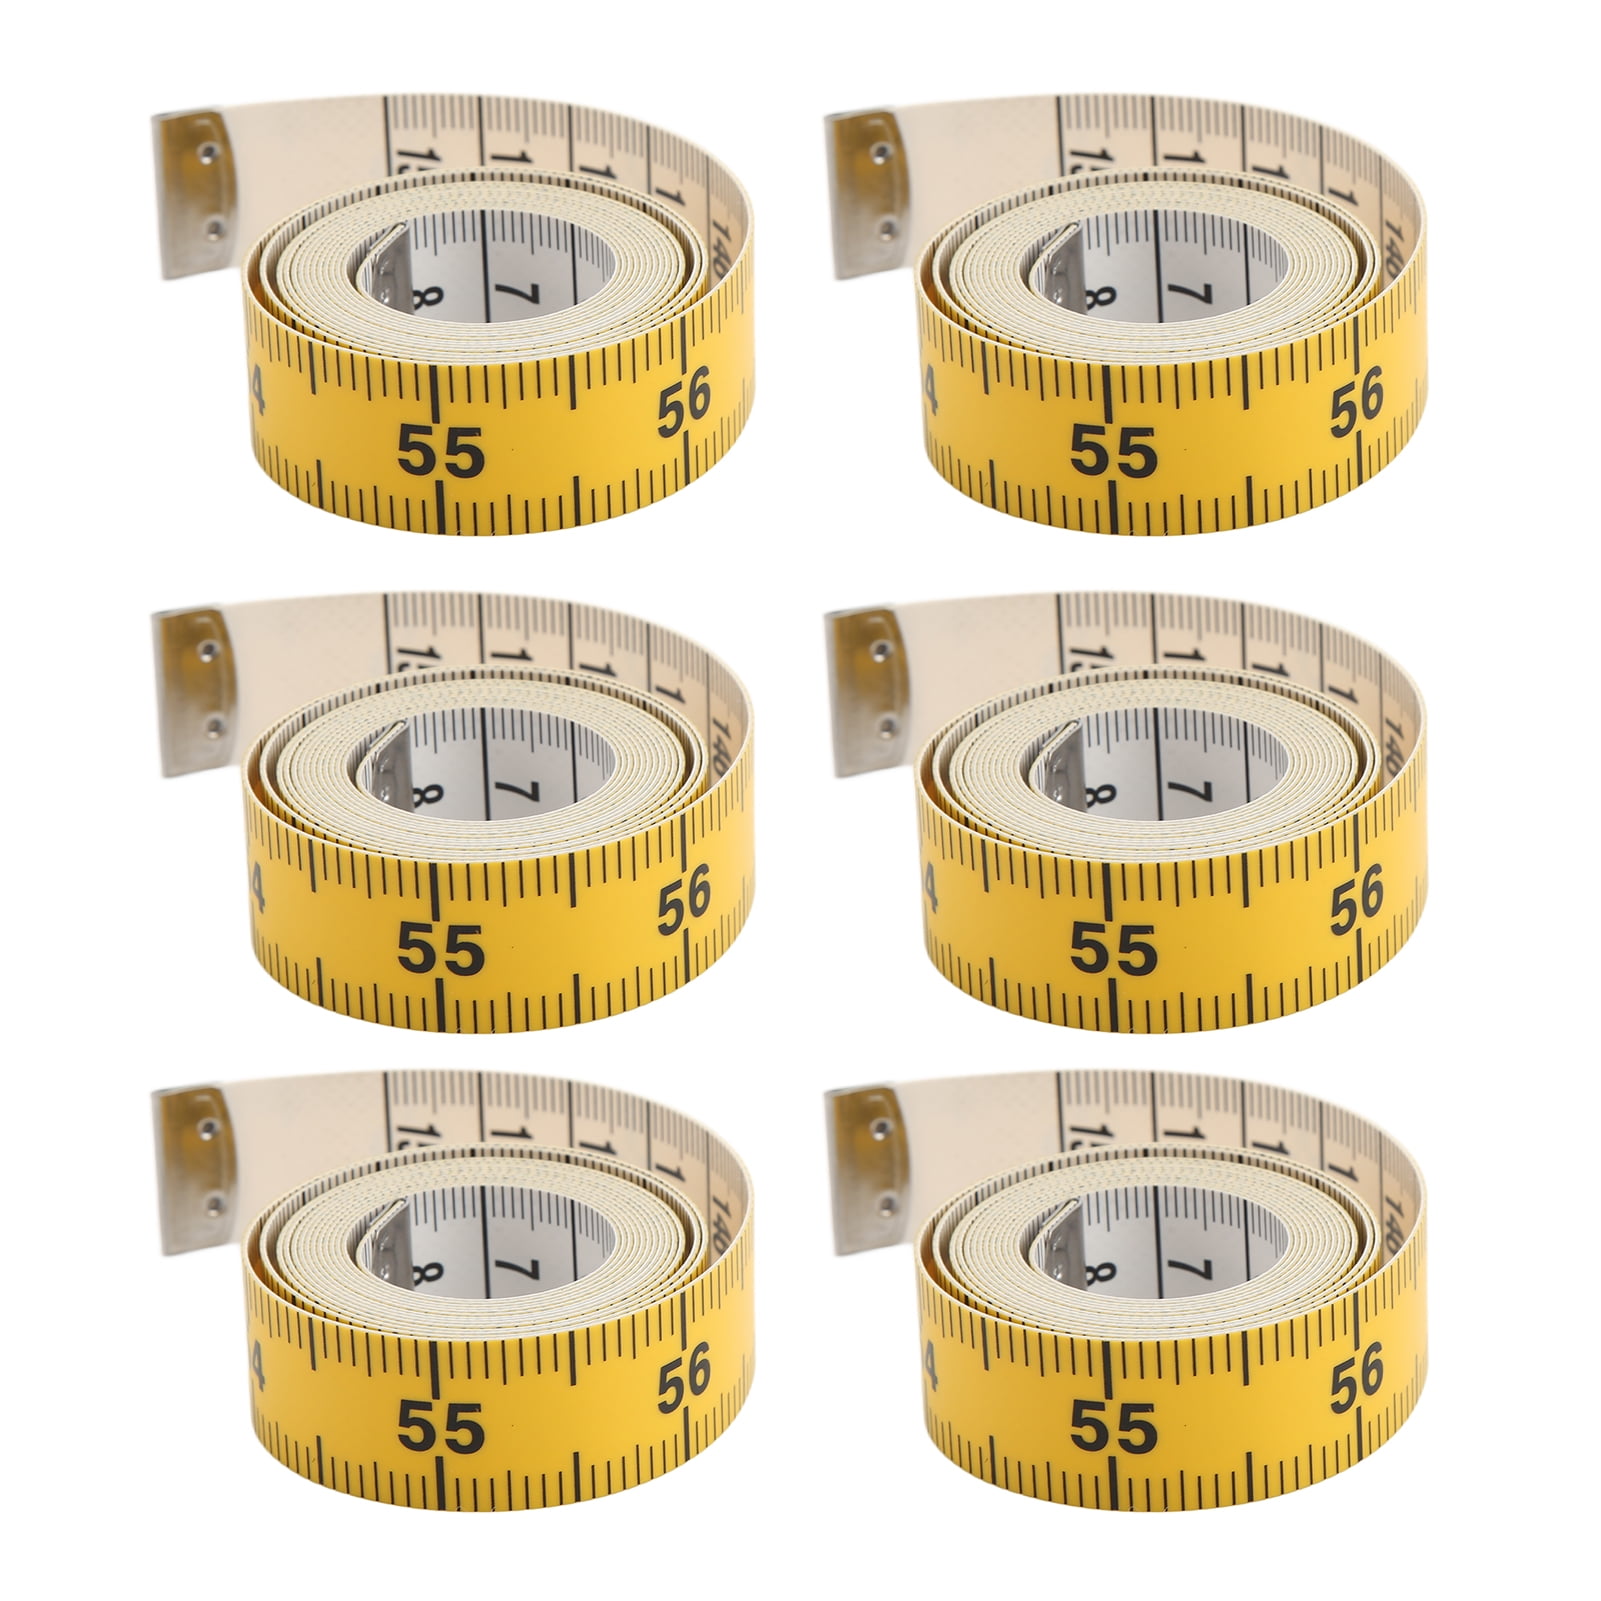 60 INCH SOFT TAPE MEASURE — YARNS, PATTERNS, ACCESSORIES